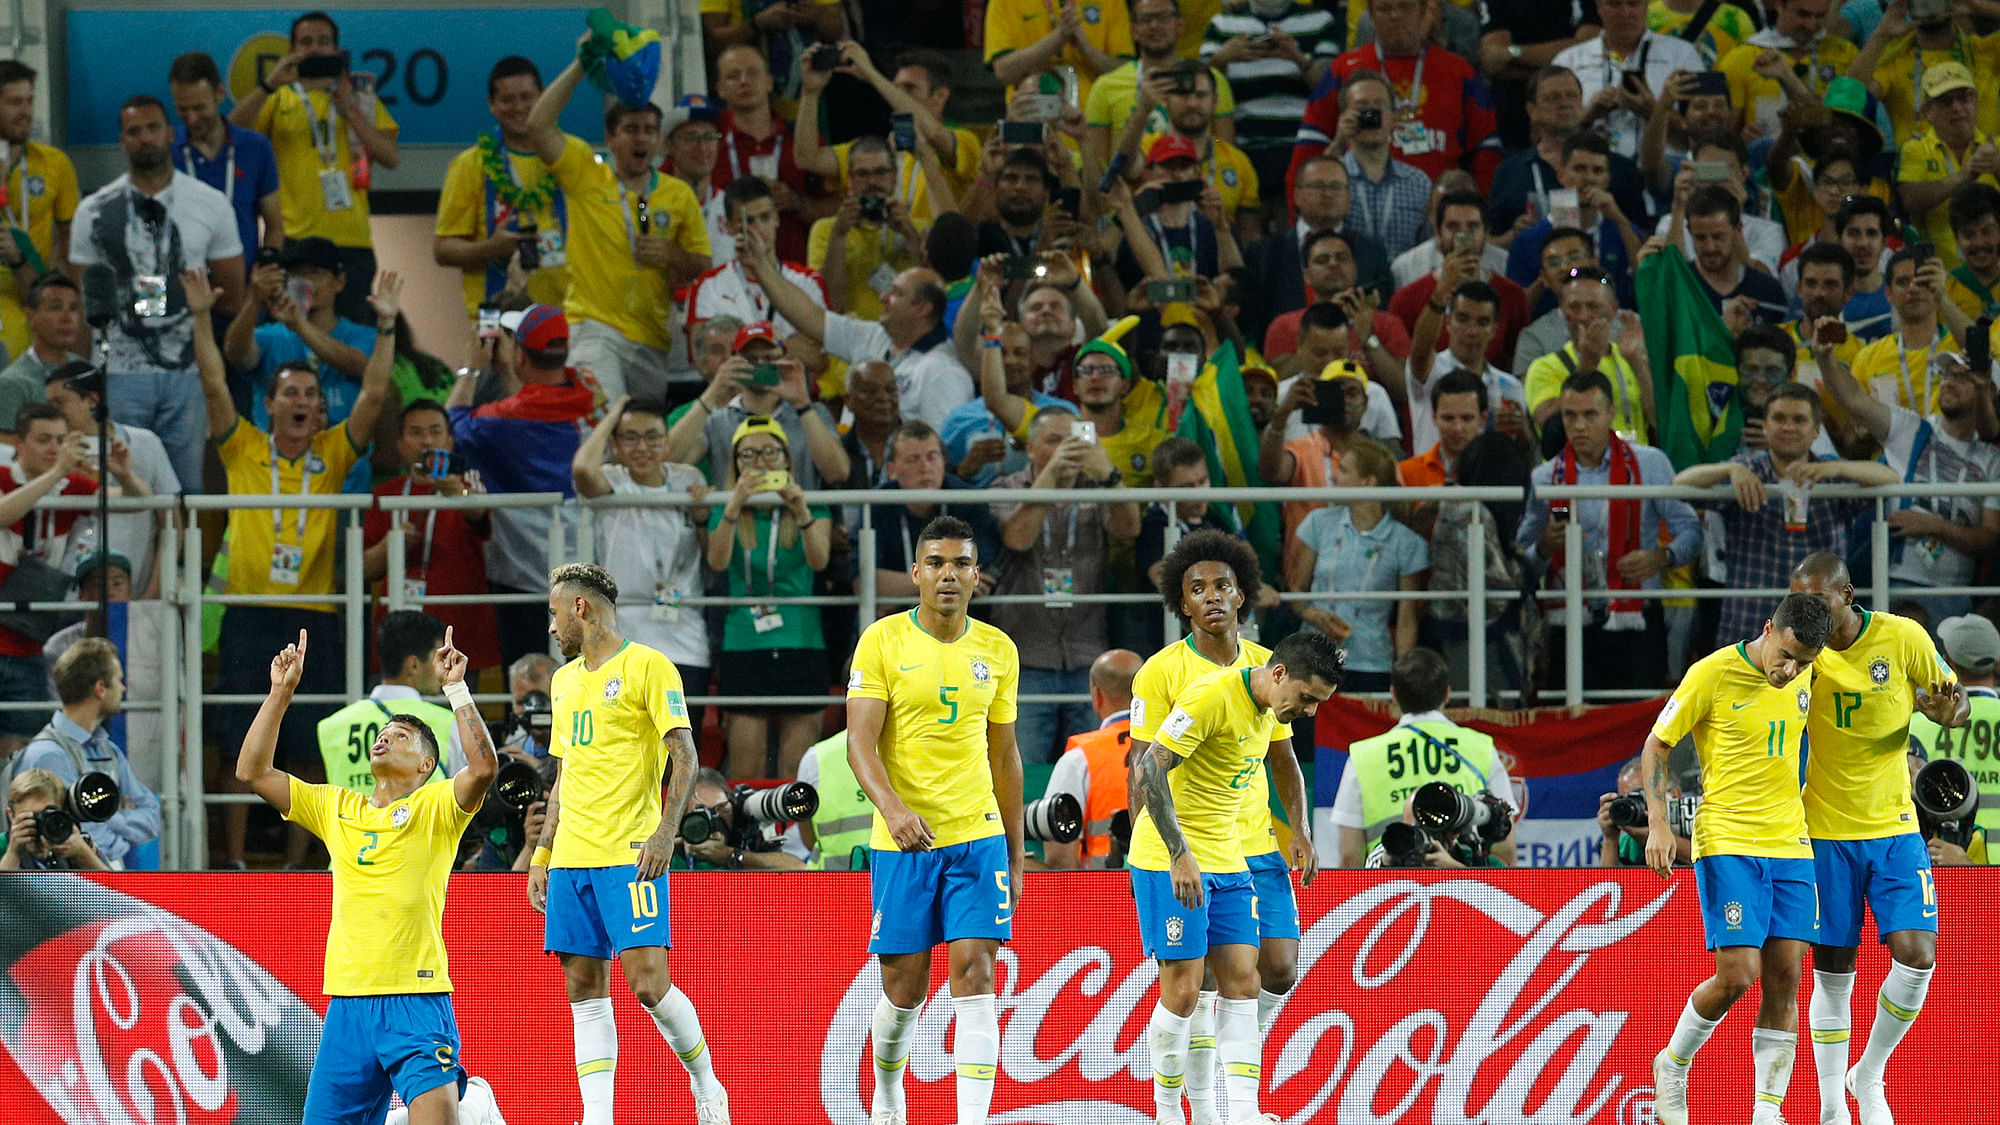 Brazil’s stingy defence has been underrated, having conceded only 6 goals under Coach Tite